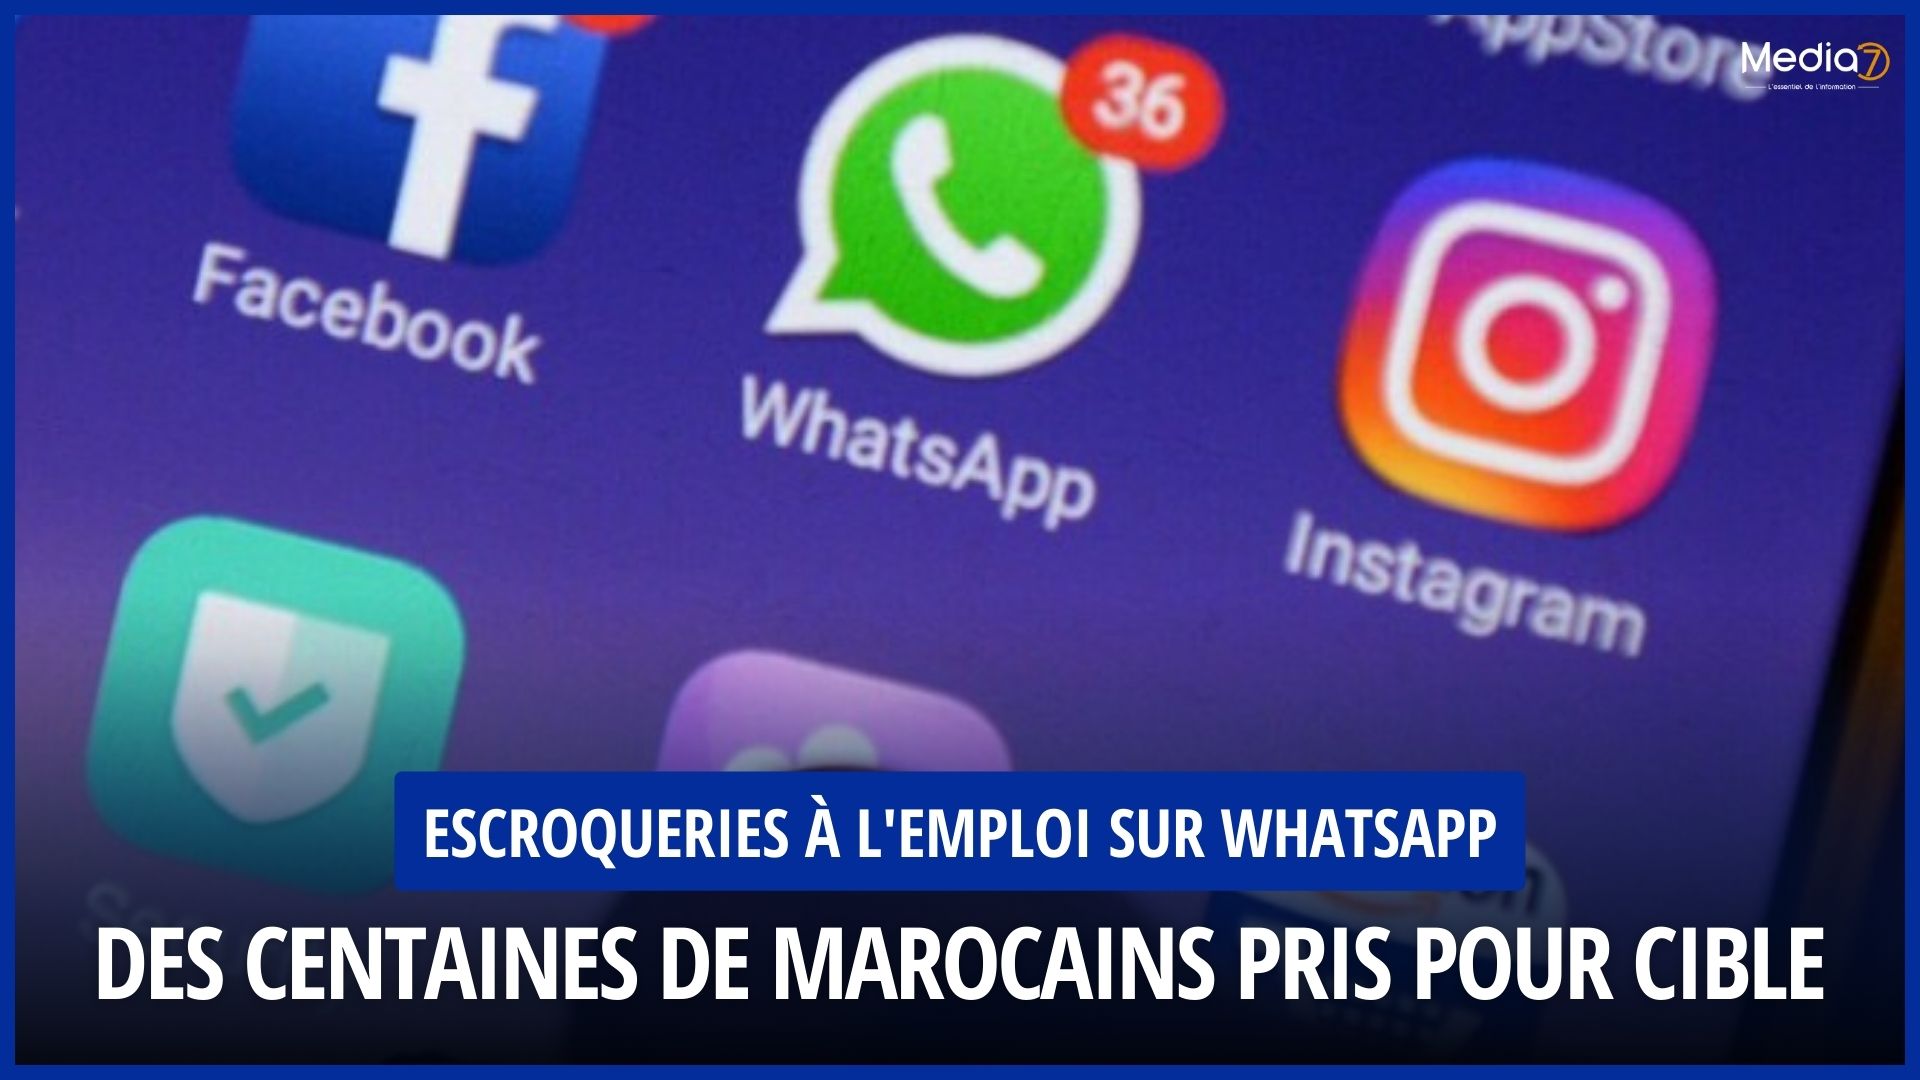 Job Scams on WhatsApp: Hundreds of Moroccans Targeted